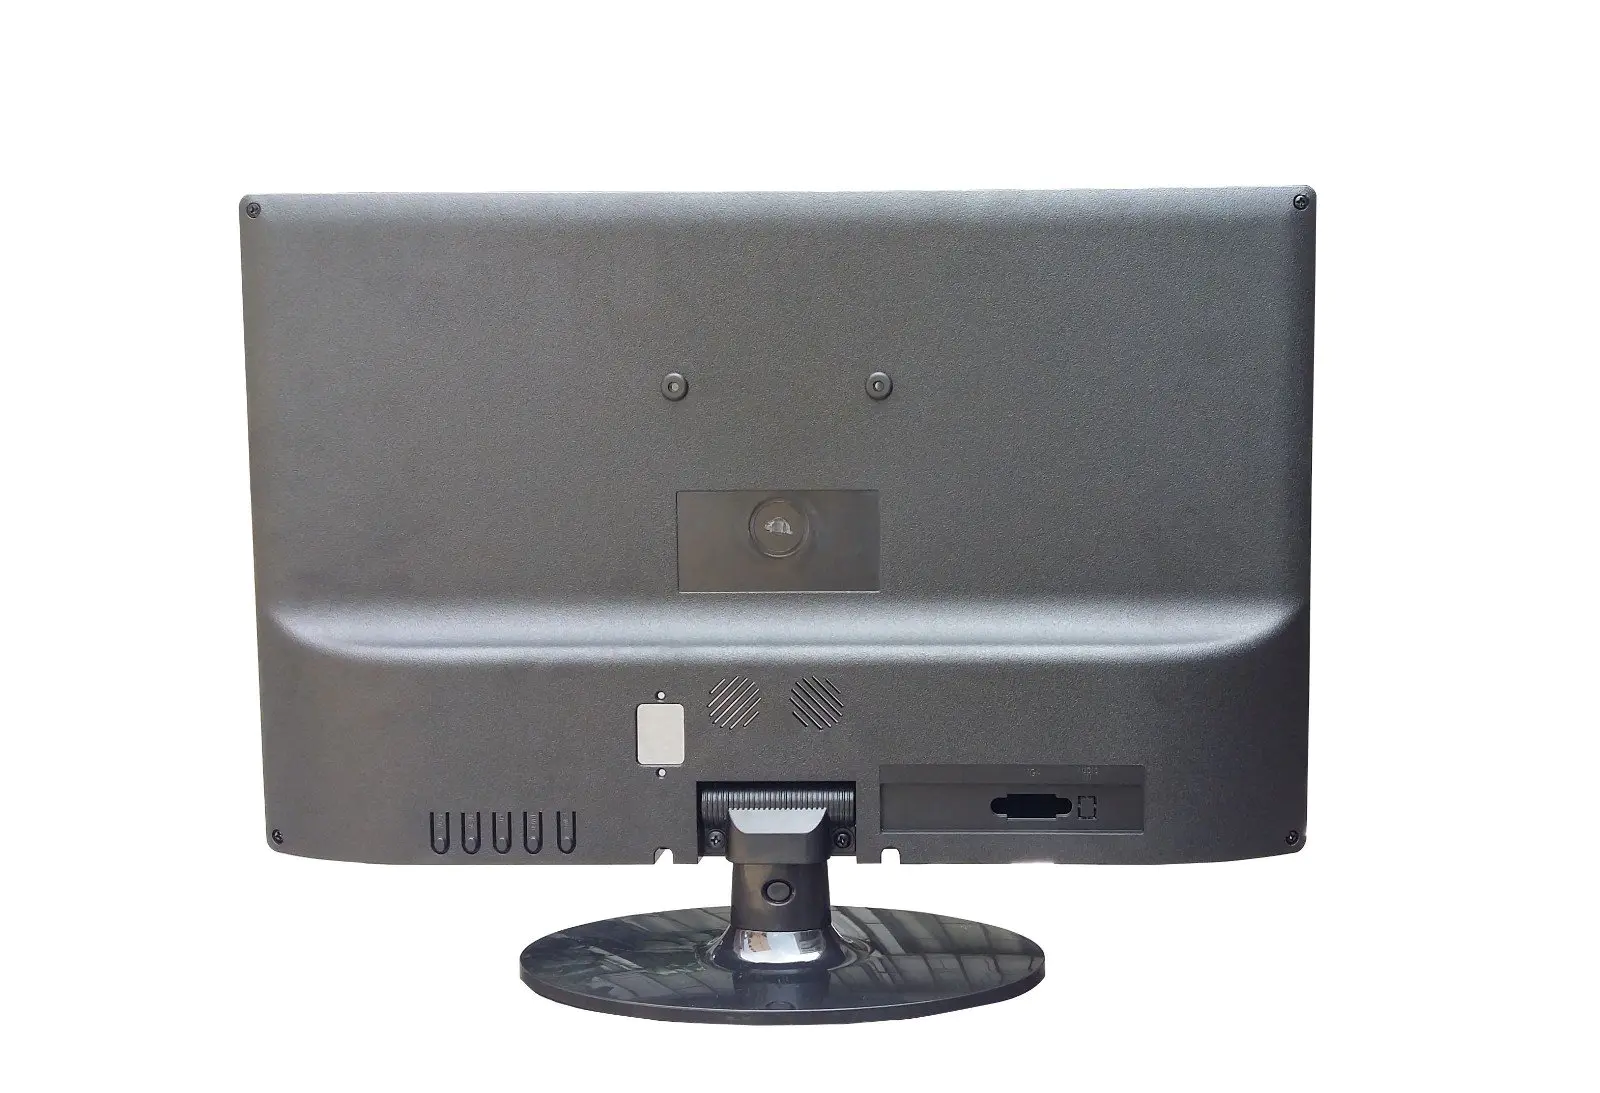 Xinyao LCD speaker 19 inch computer monitor OEM for tv screen